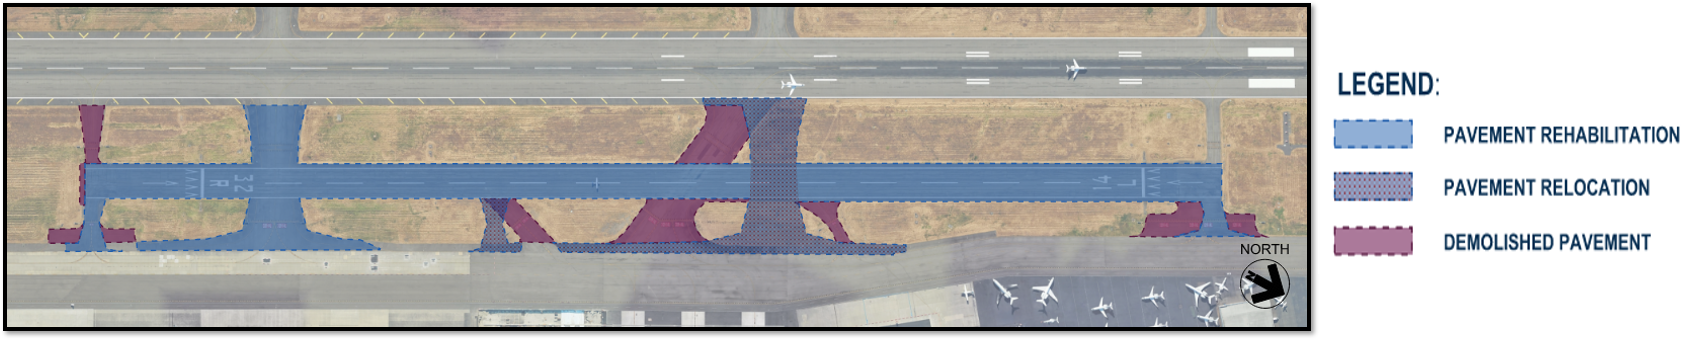 Closeup map of Runway 14L/32R showing pavement rehabilitation, demolition, and relocation areas